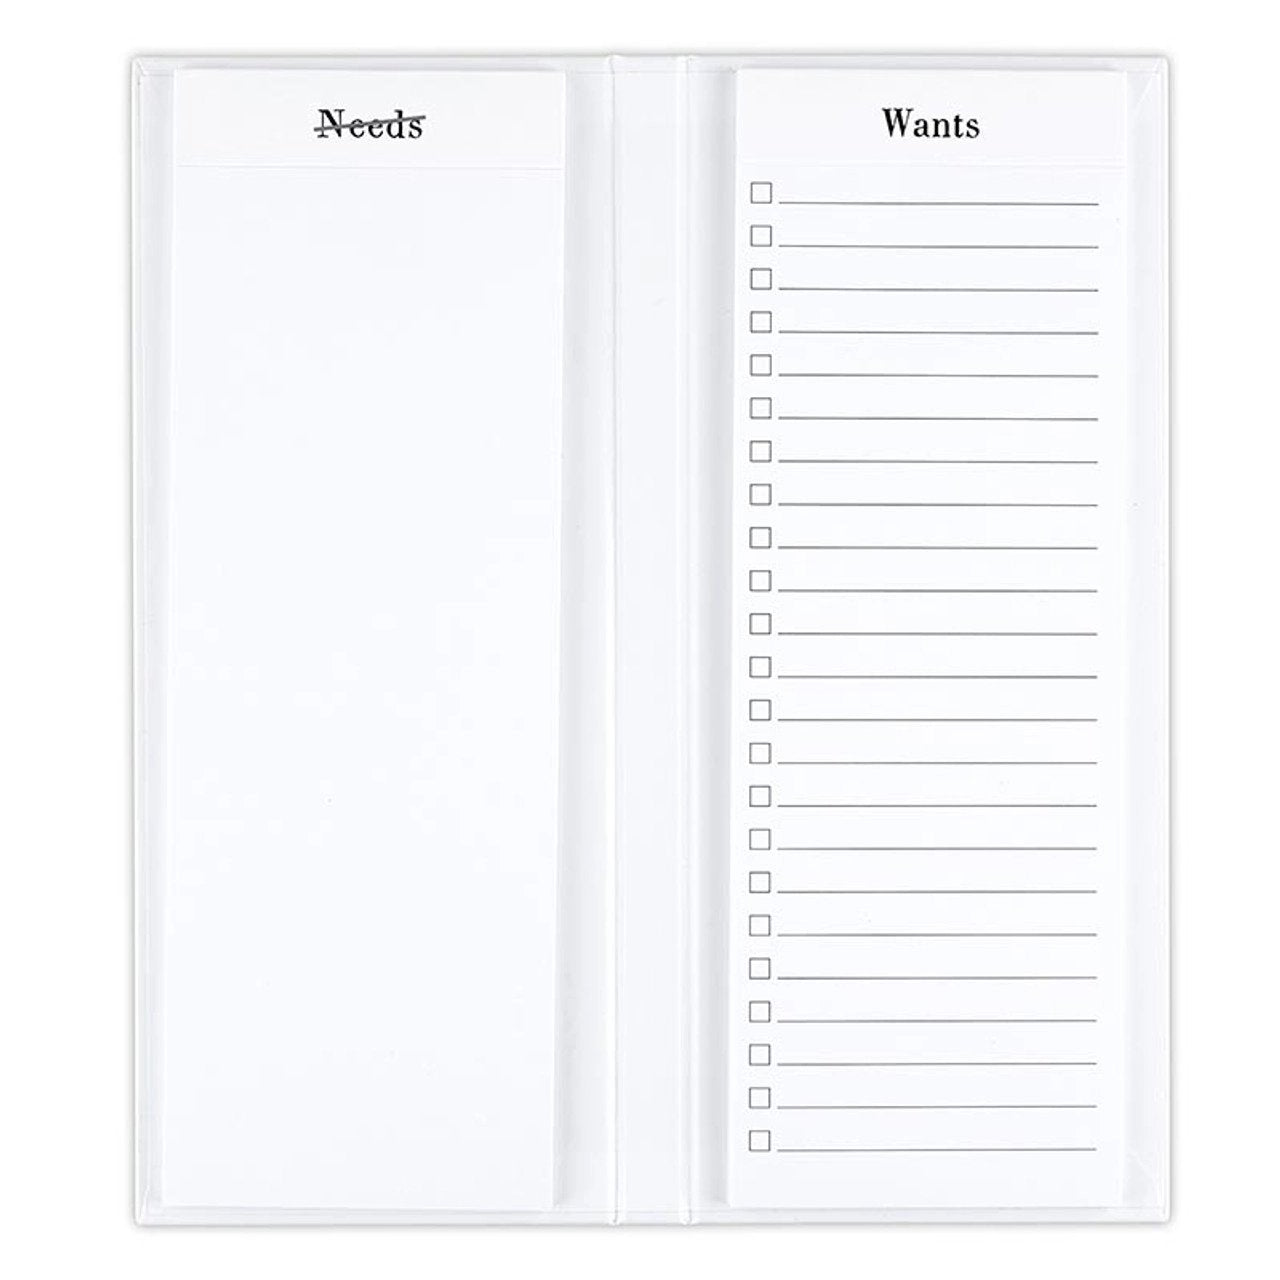 Give Me The Luxuries of Life Daily Planner List Pad